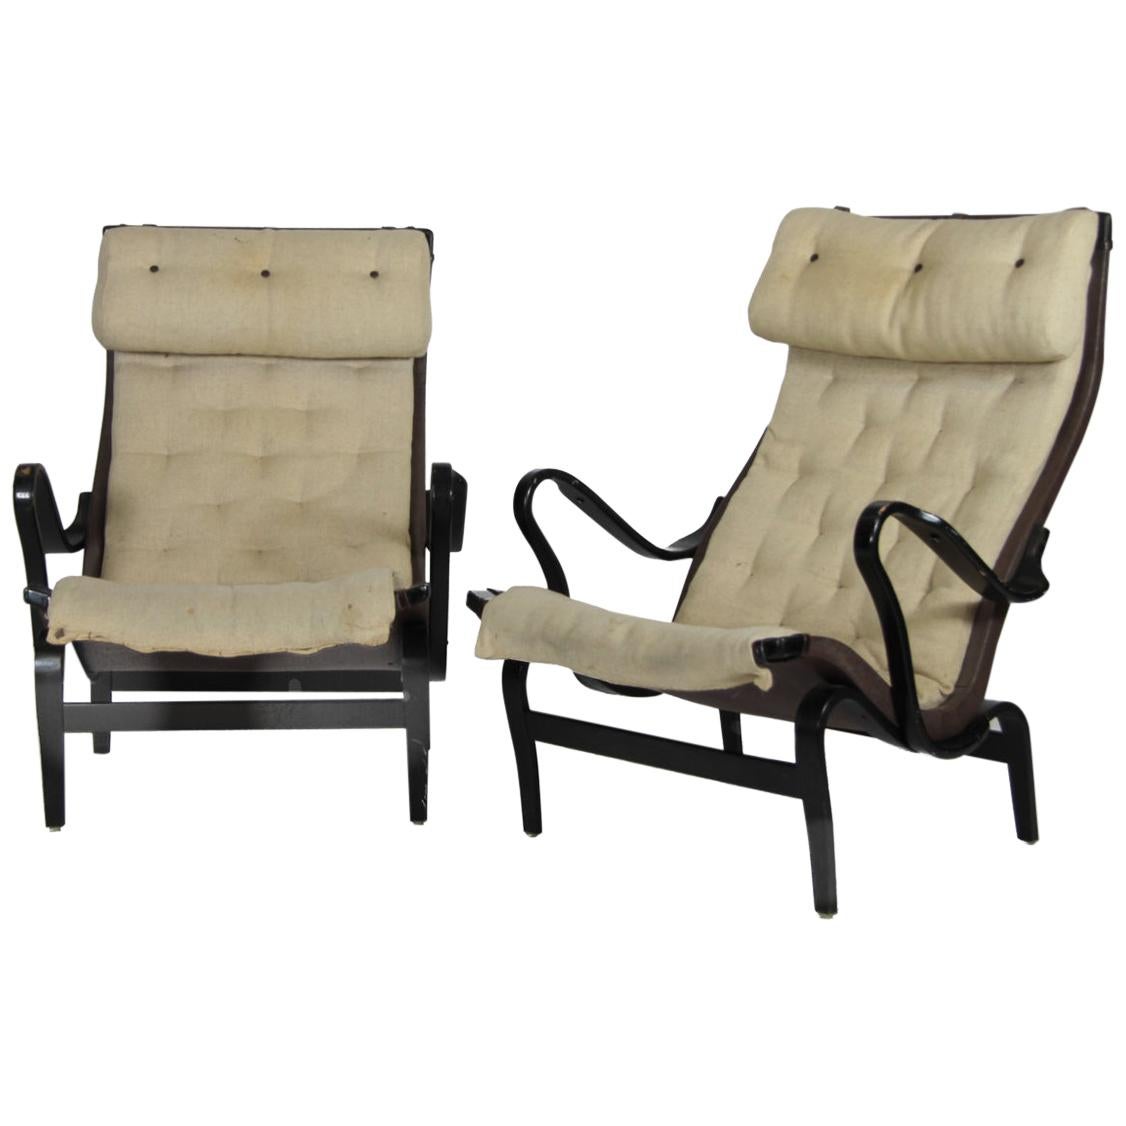 Pair of Bruno Mathssons Pernilla Lounge Chairs, Black, Sweden, 1970s, Add Value